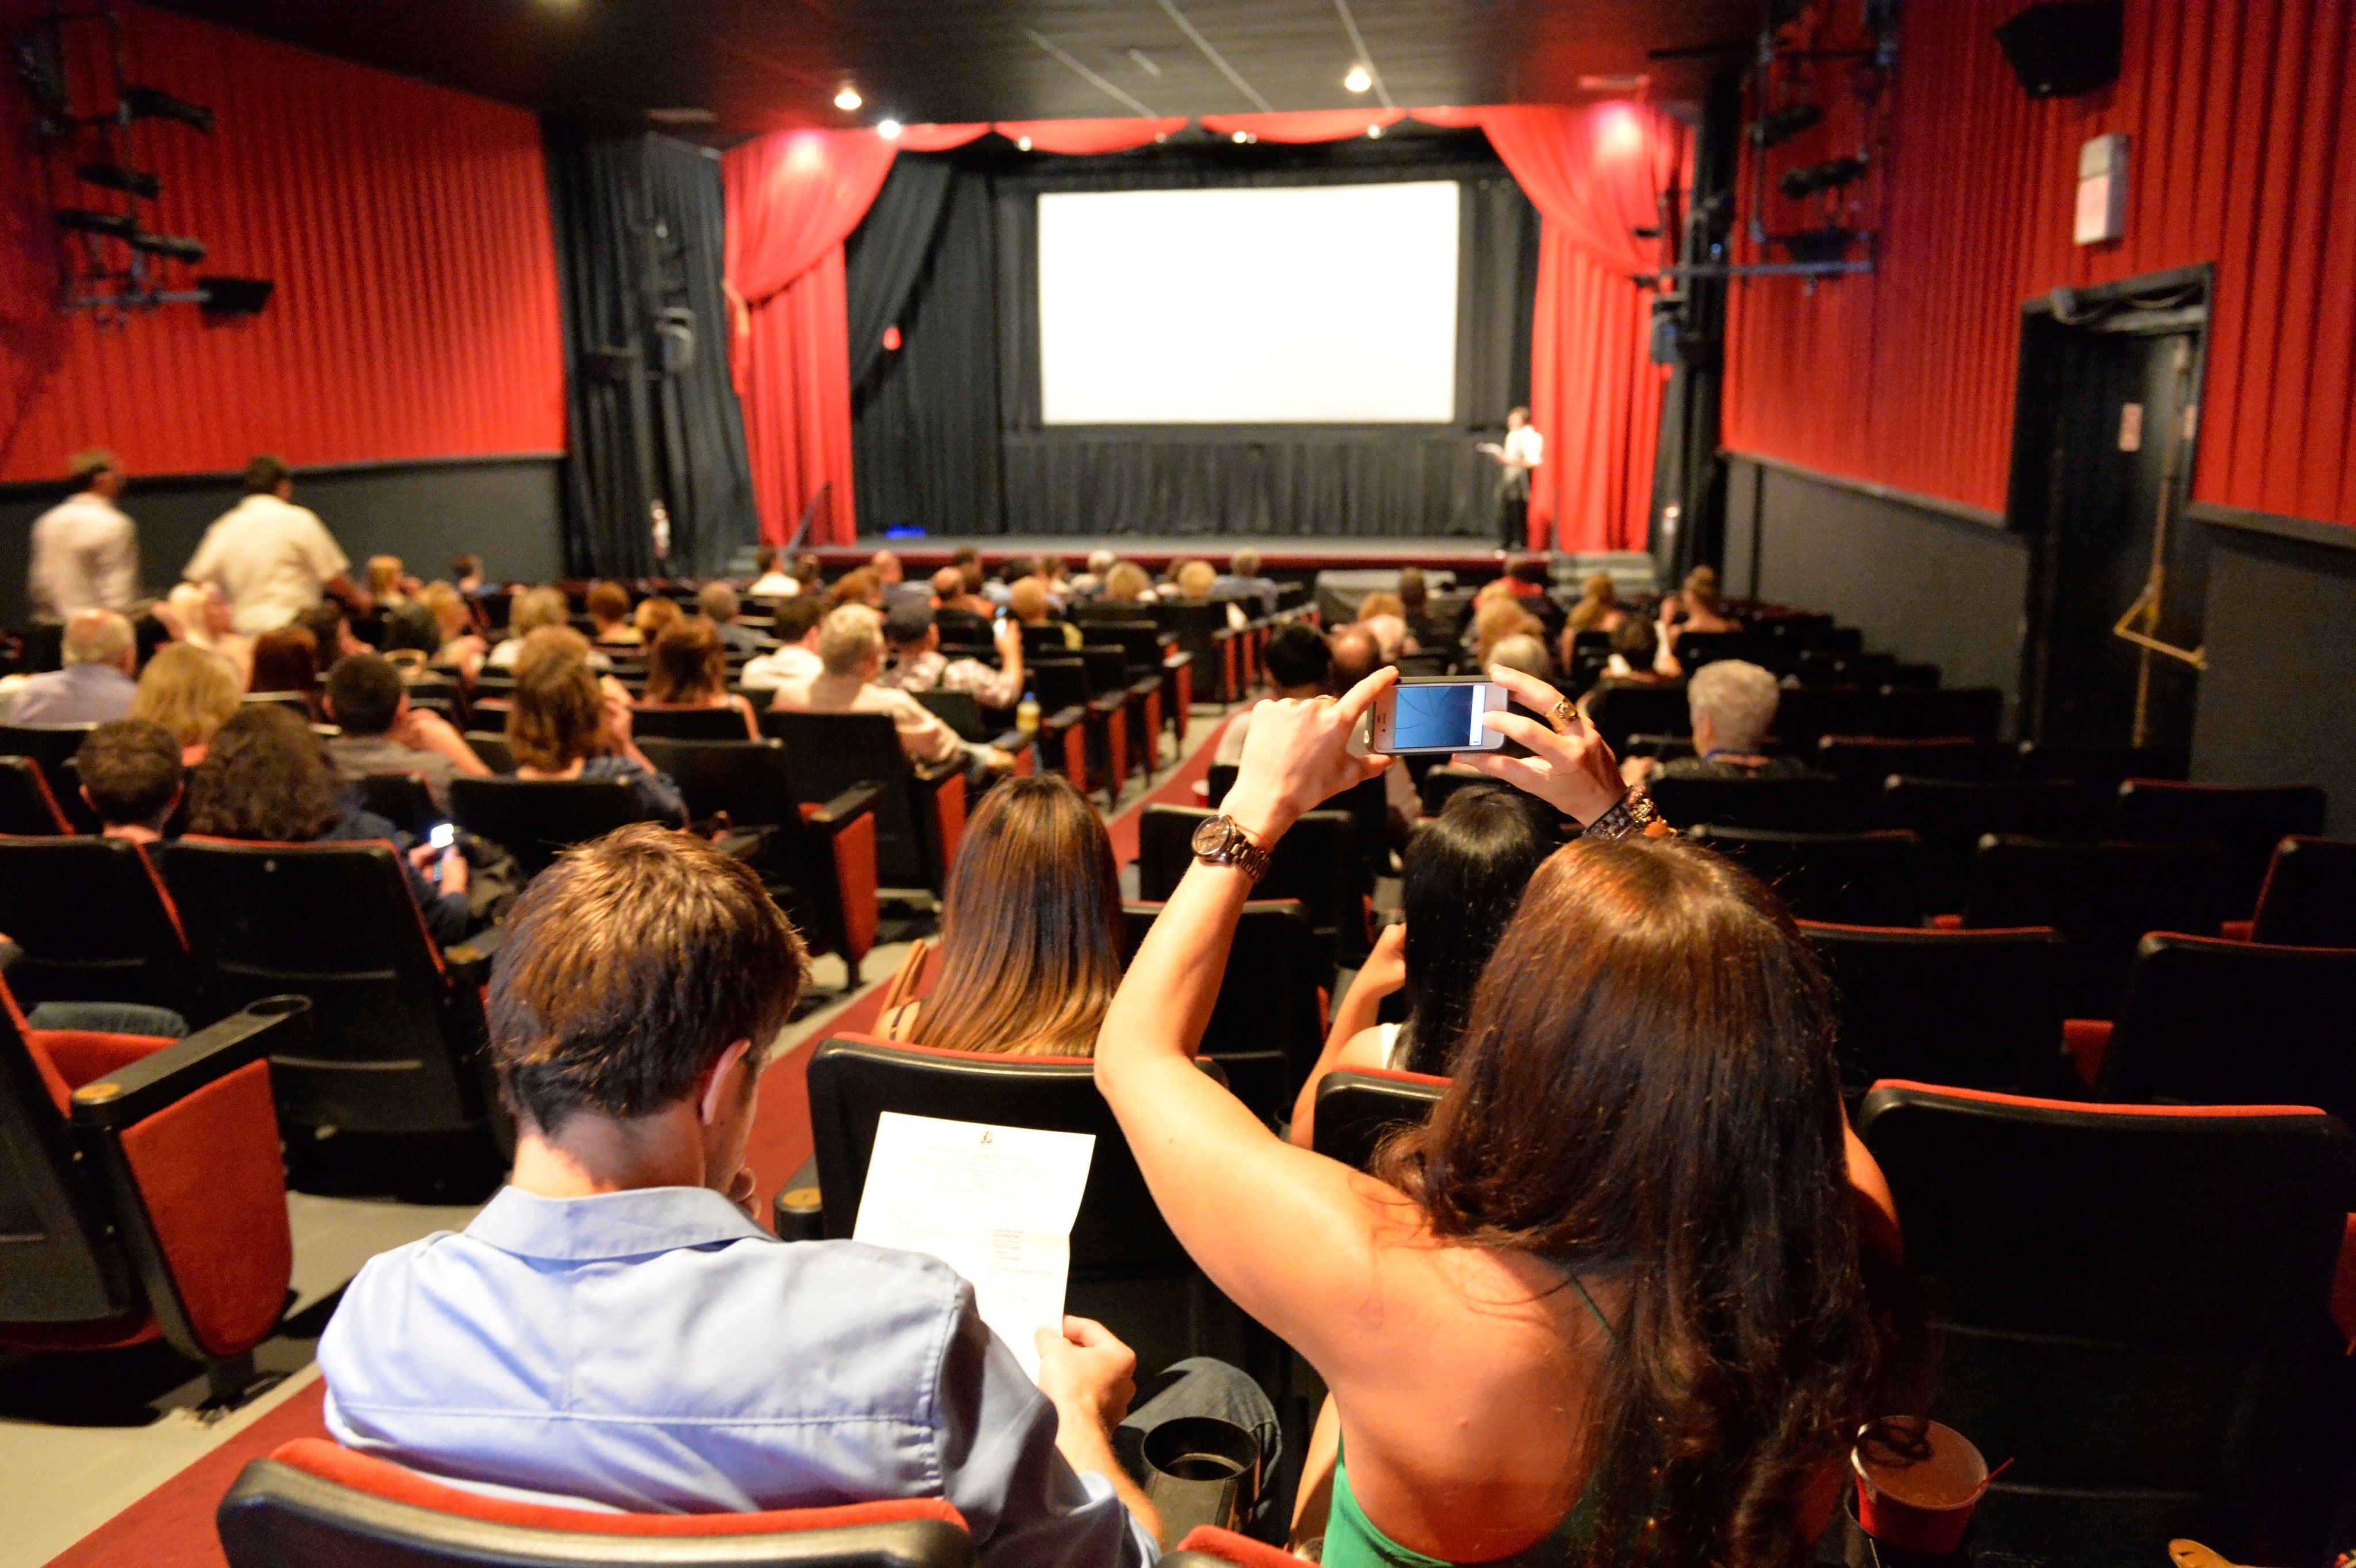 A woman takes a phone photo before the screening of film Halina during the Long Island International Film Expo in 2015. An author finds theatre etiquette so interesting she has written two books on the subject. Photo: ZUMAPRESS.com